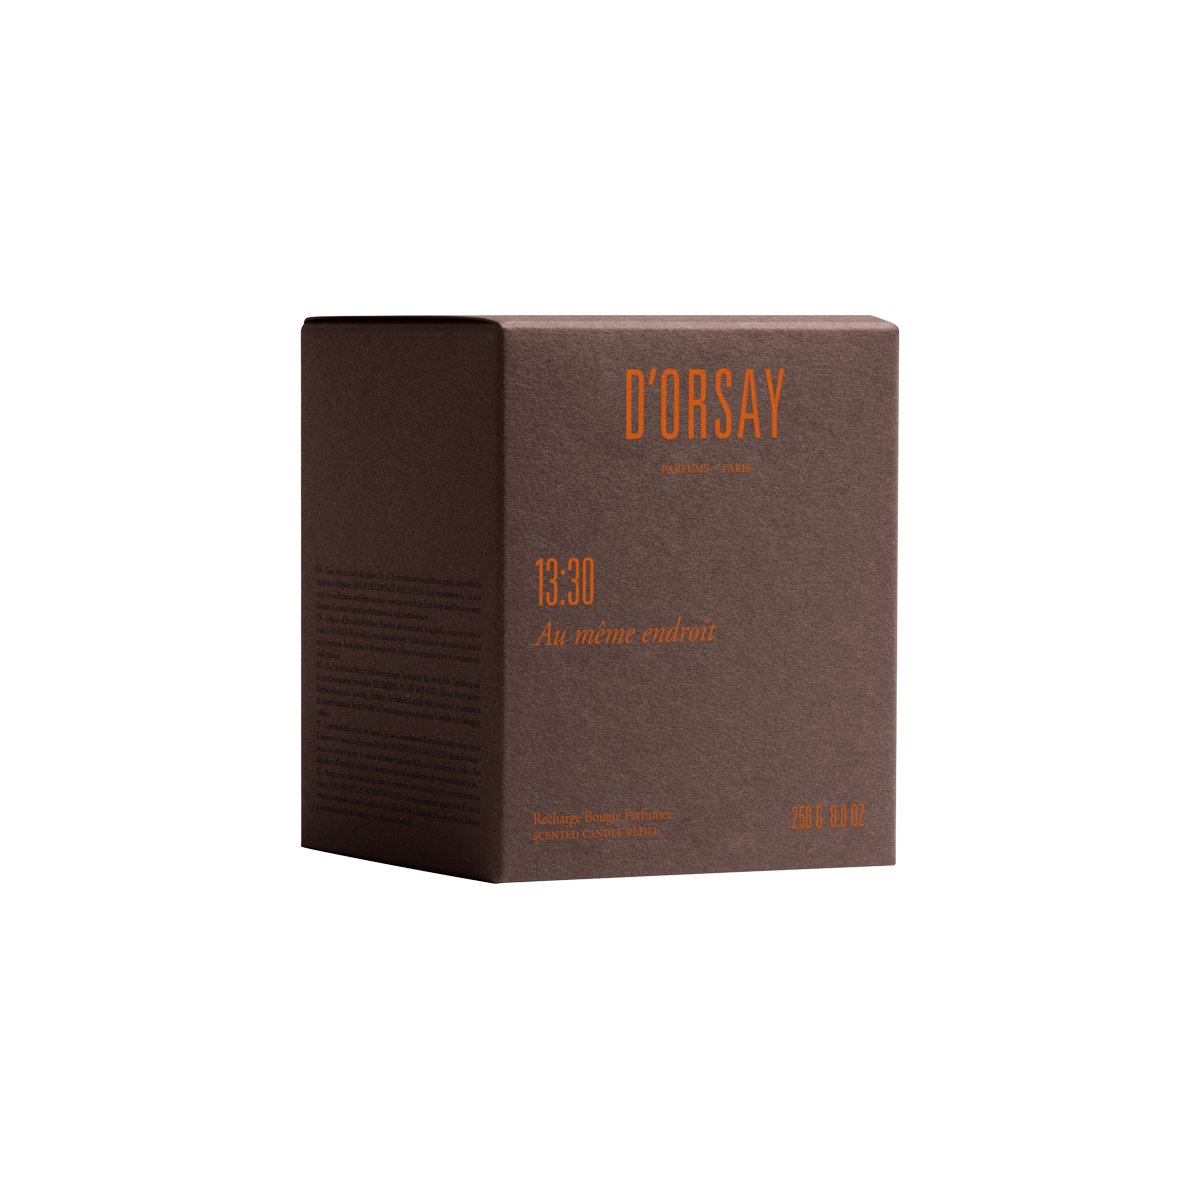 D'Orsay - Scented Candle 13:30 Refill